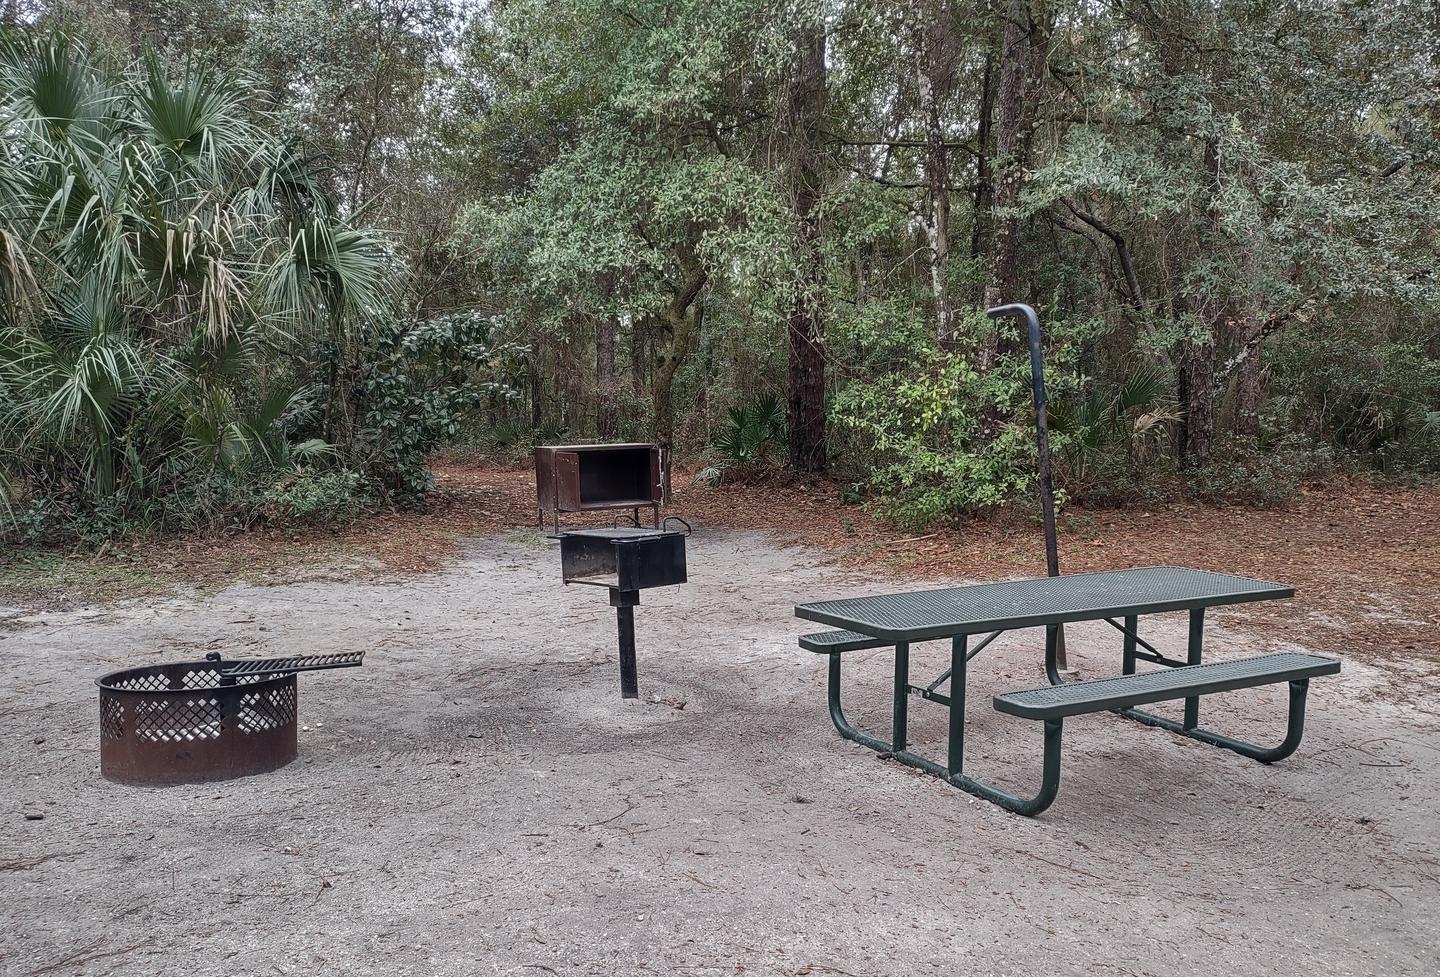 Another view of site 11Amenities: fire ring, picnic table, grill, light pole, bear-proof storage locker